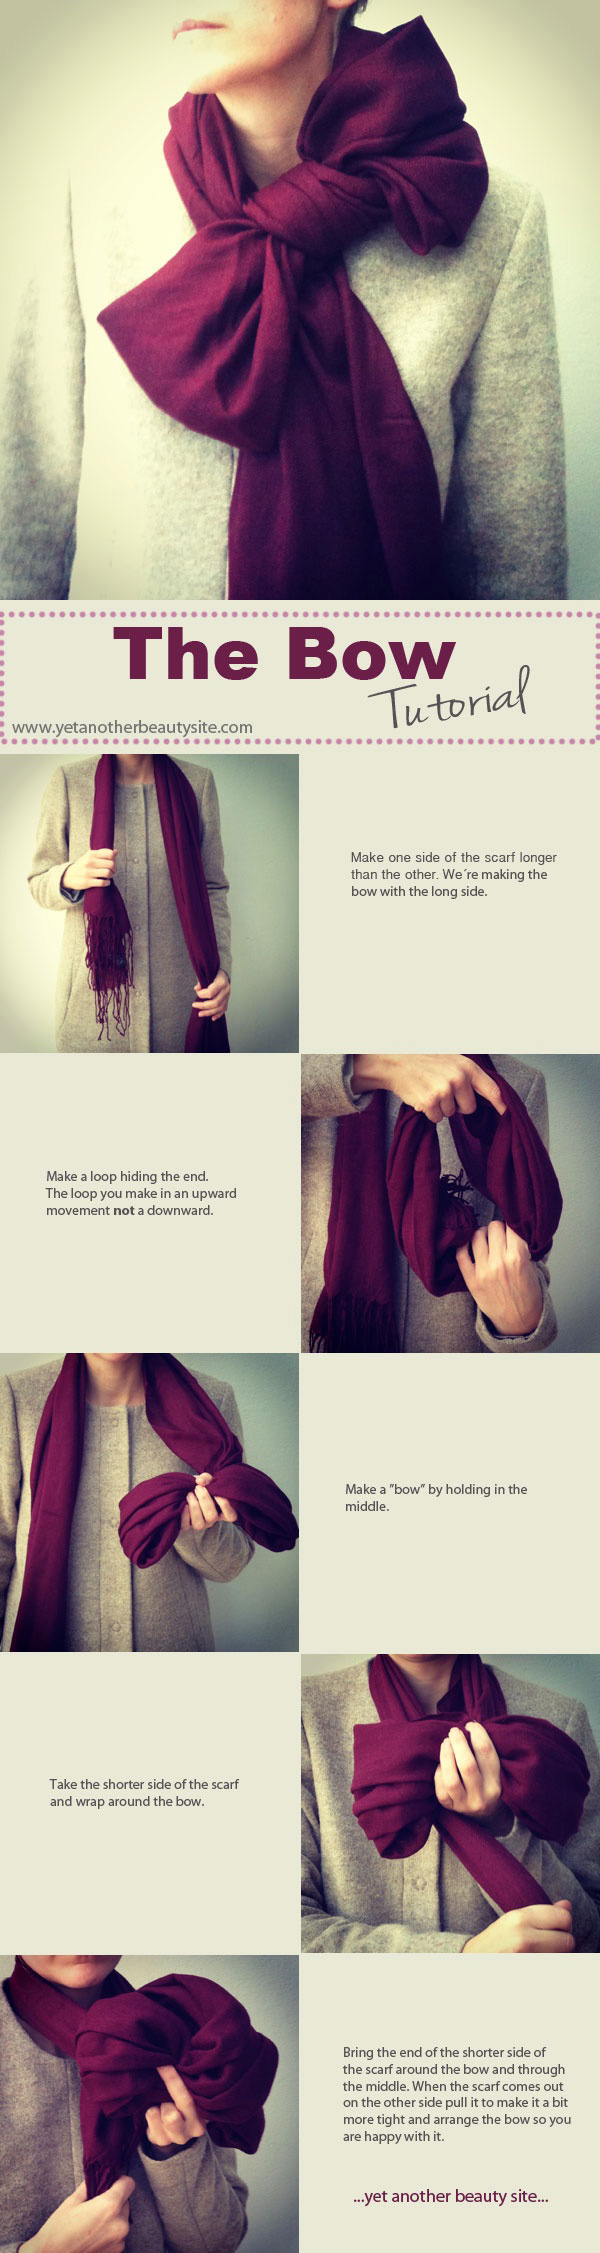 how to wear a scarf